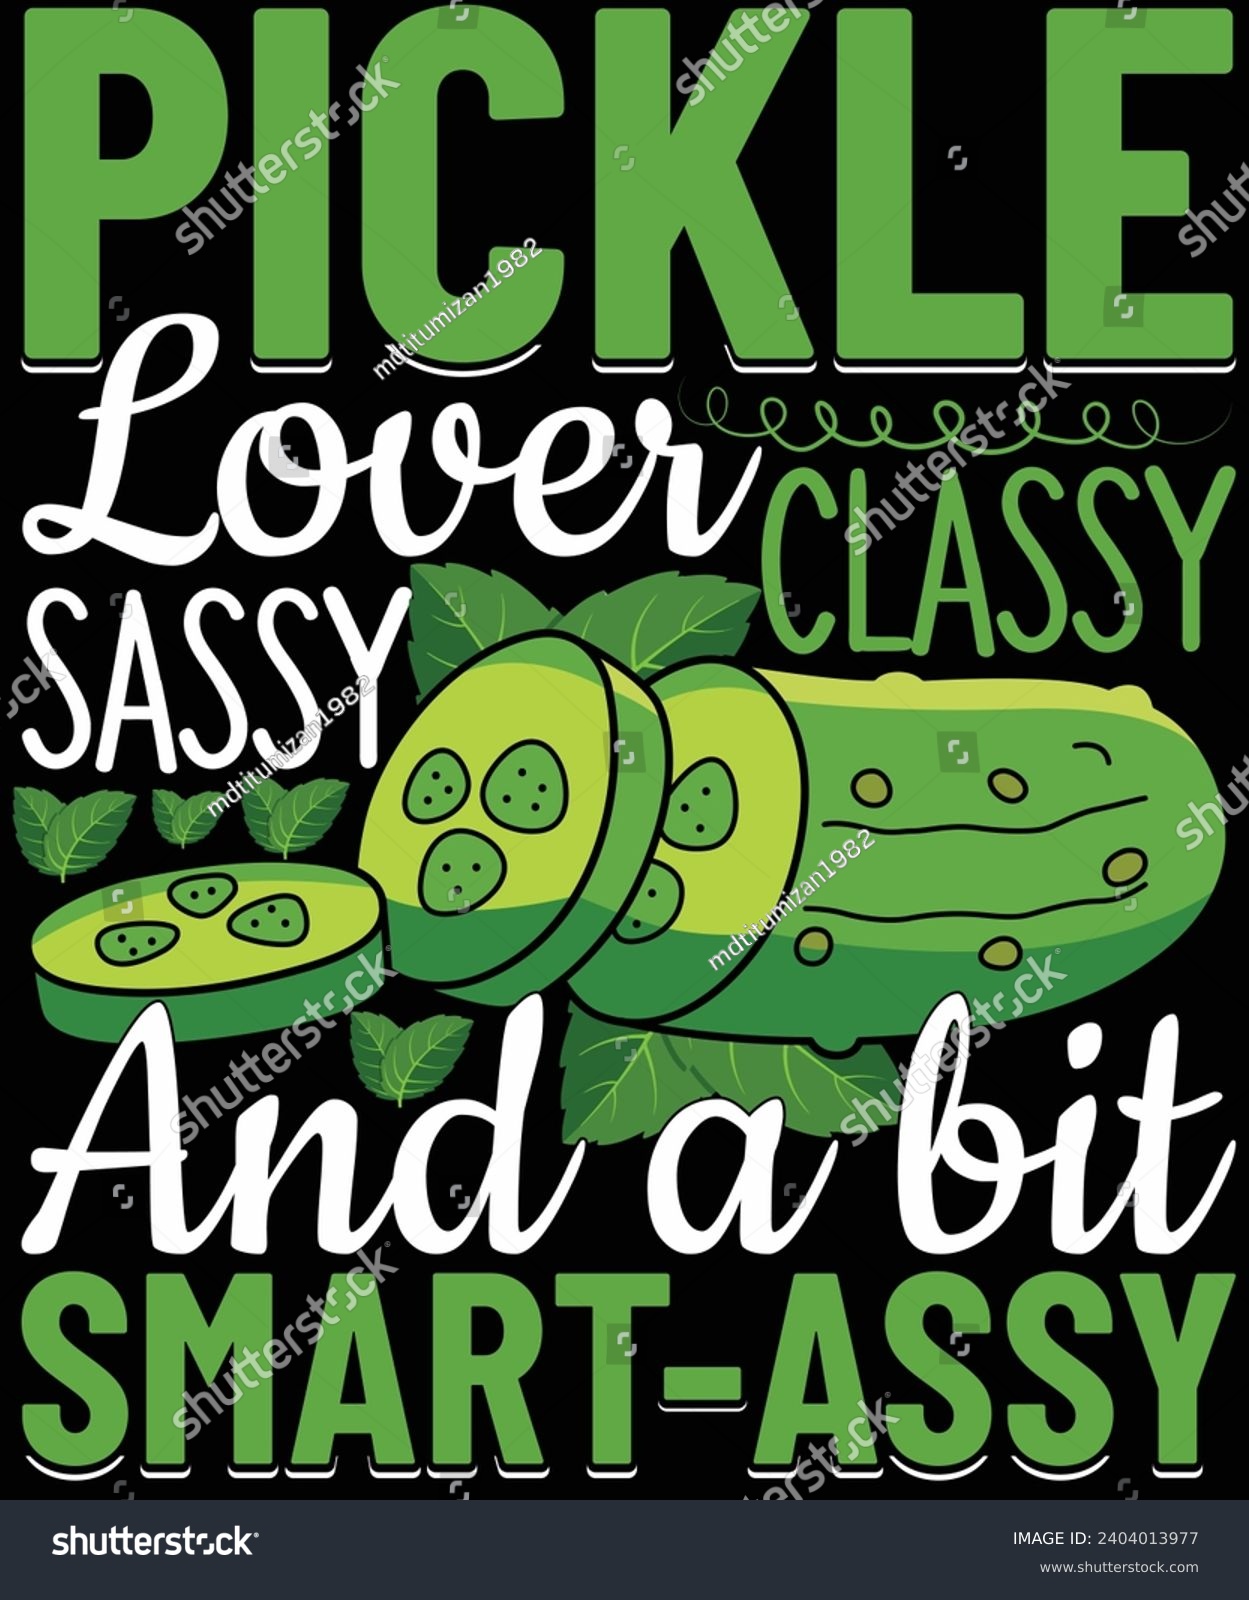 SVG of Pickle lover classy sassy and a bit smart assy t shirt design svg